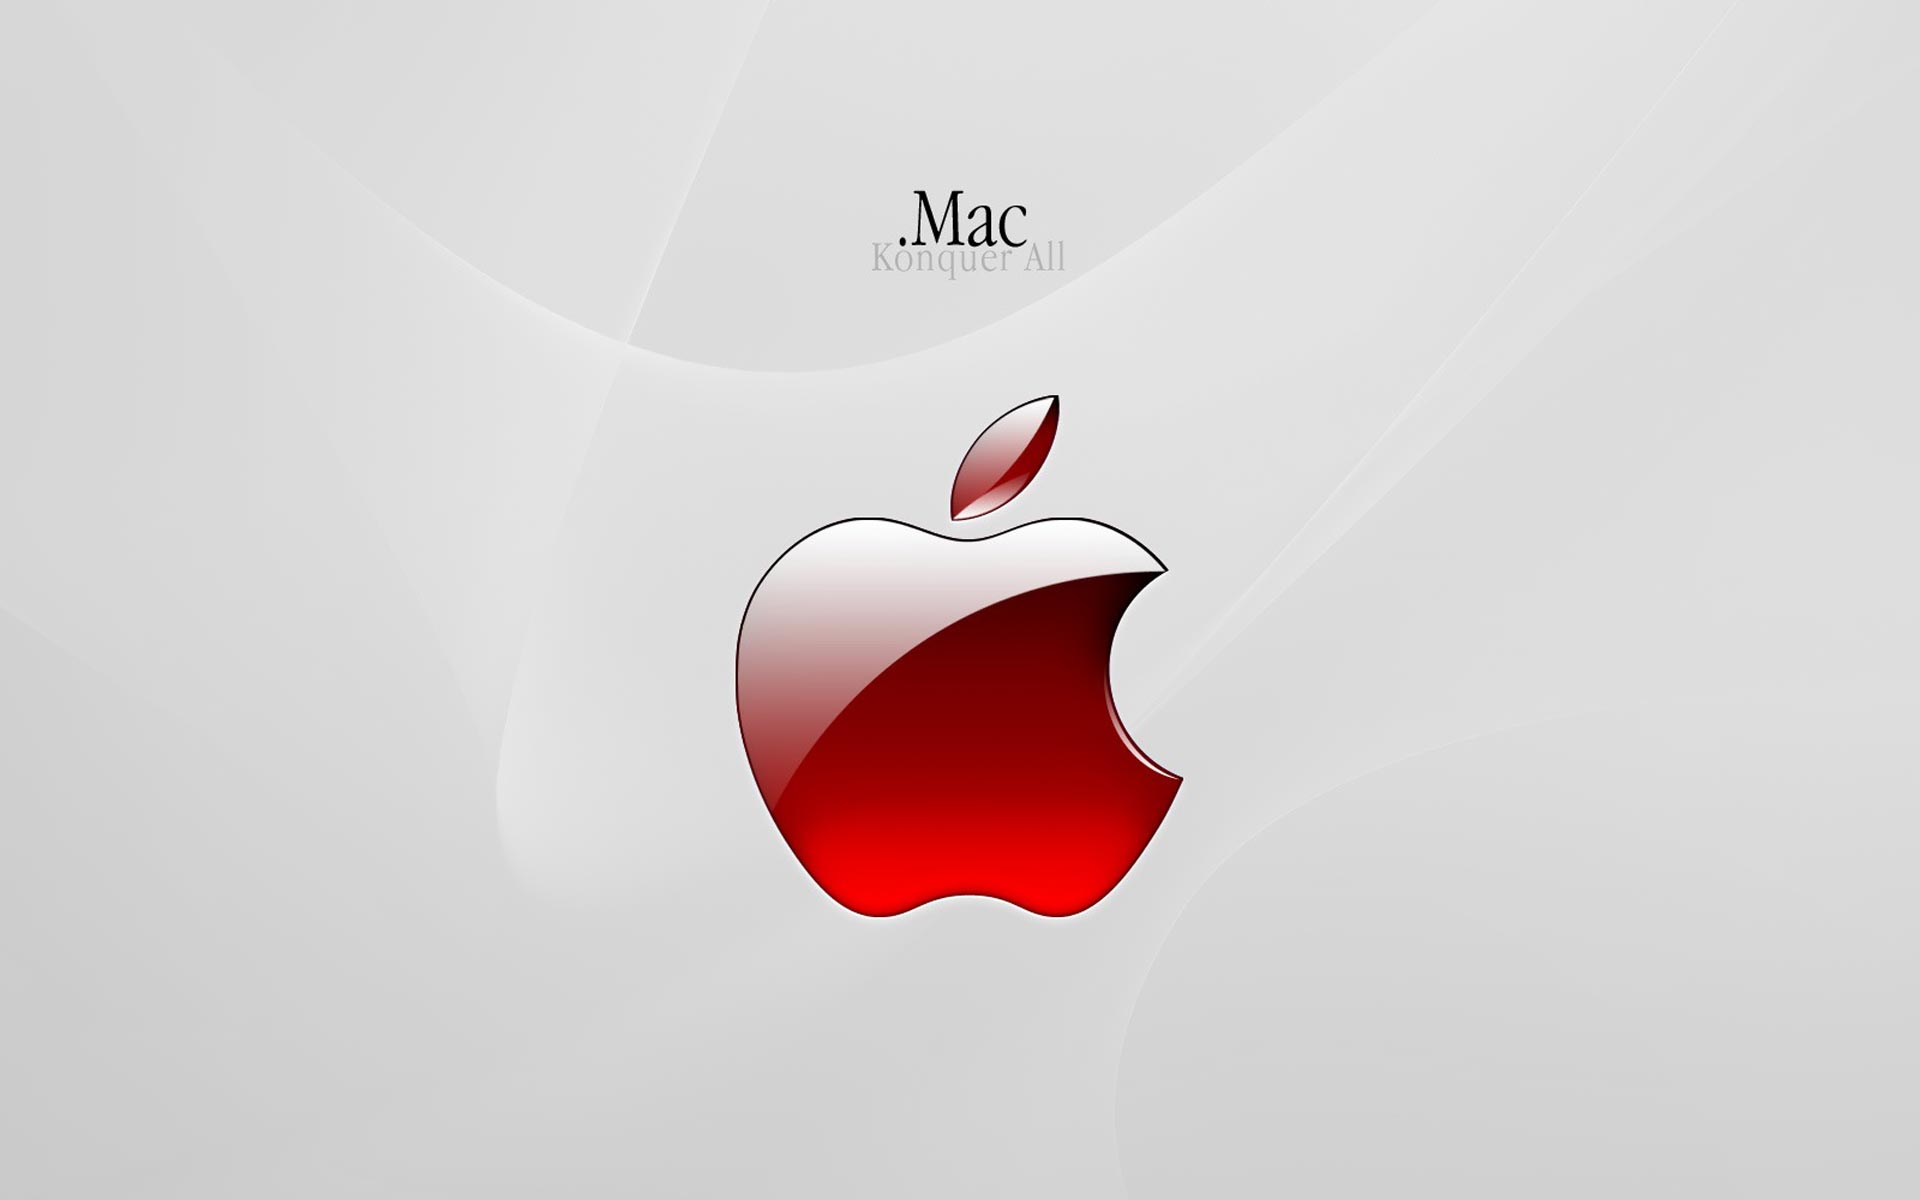 Get Apple Macbook Air Red HD Wallpaper And Make This